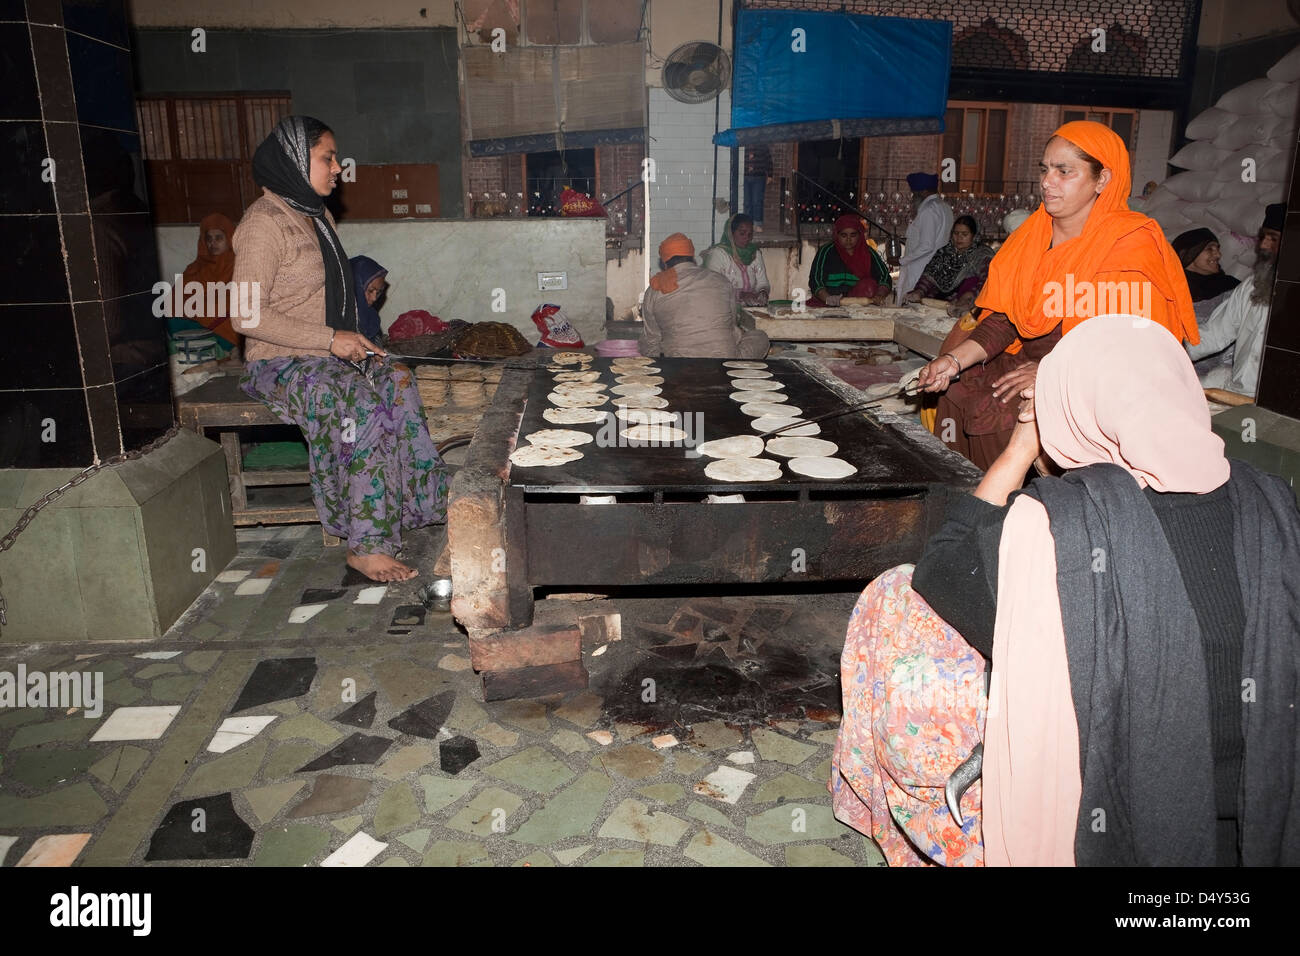 Men and women volunteers making chapattis at the free kitchen inside the Golden Temple complex at Amritsar Punjab India Stock Photo